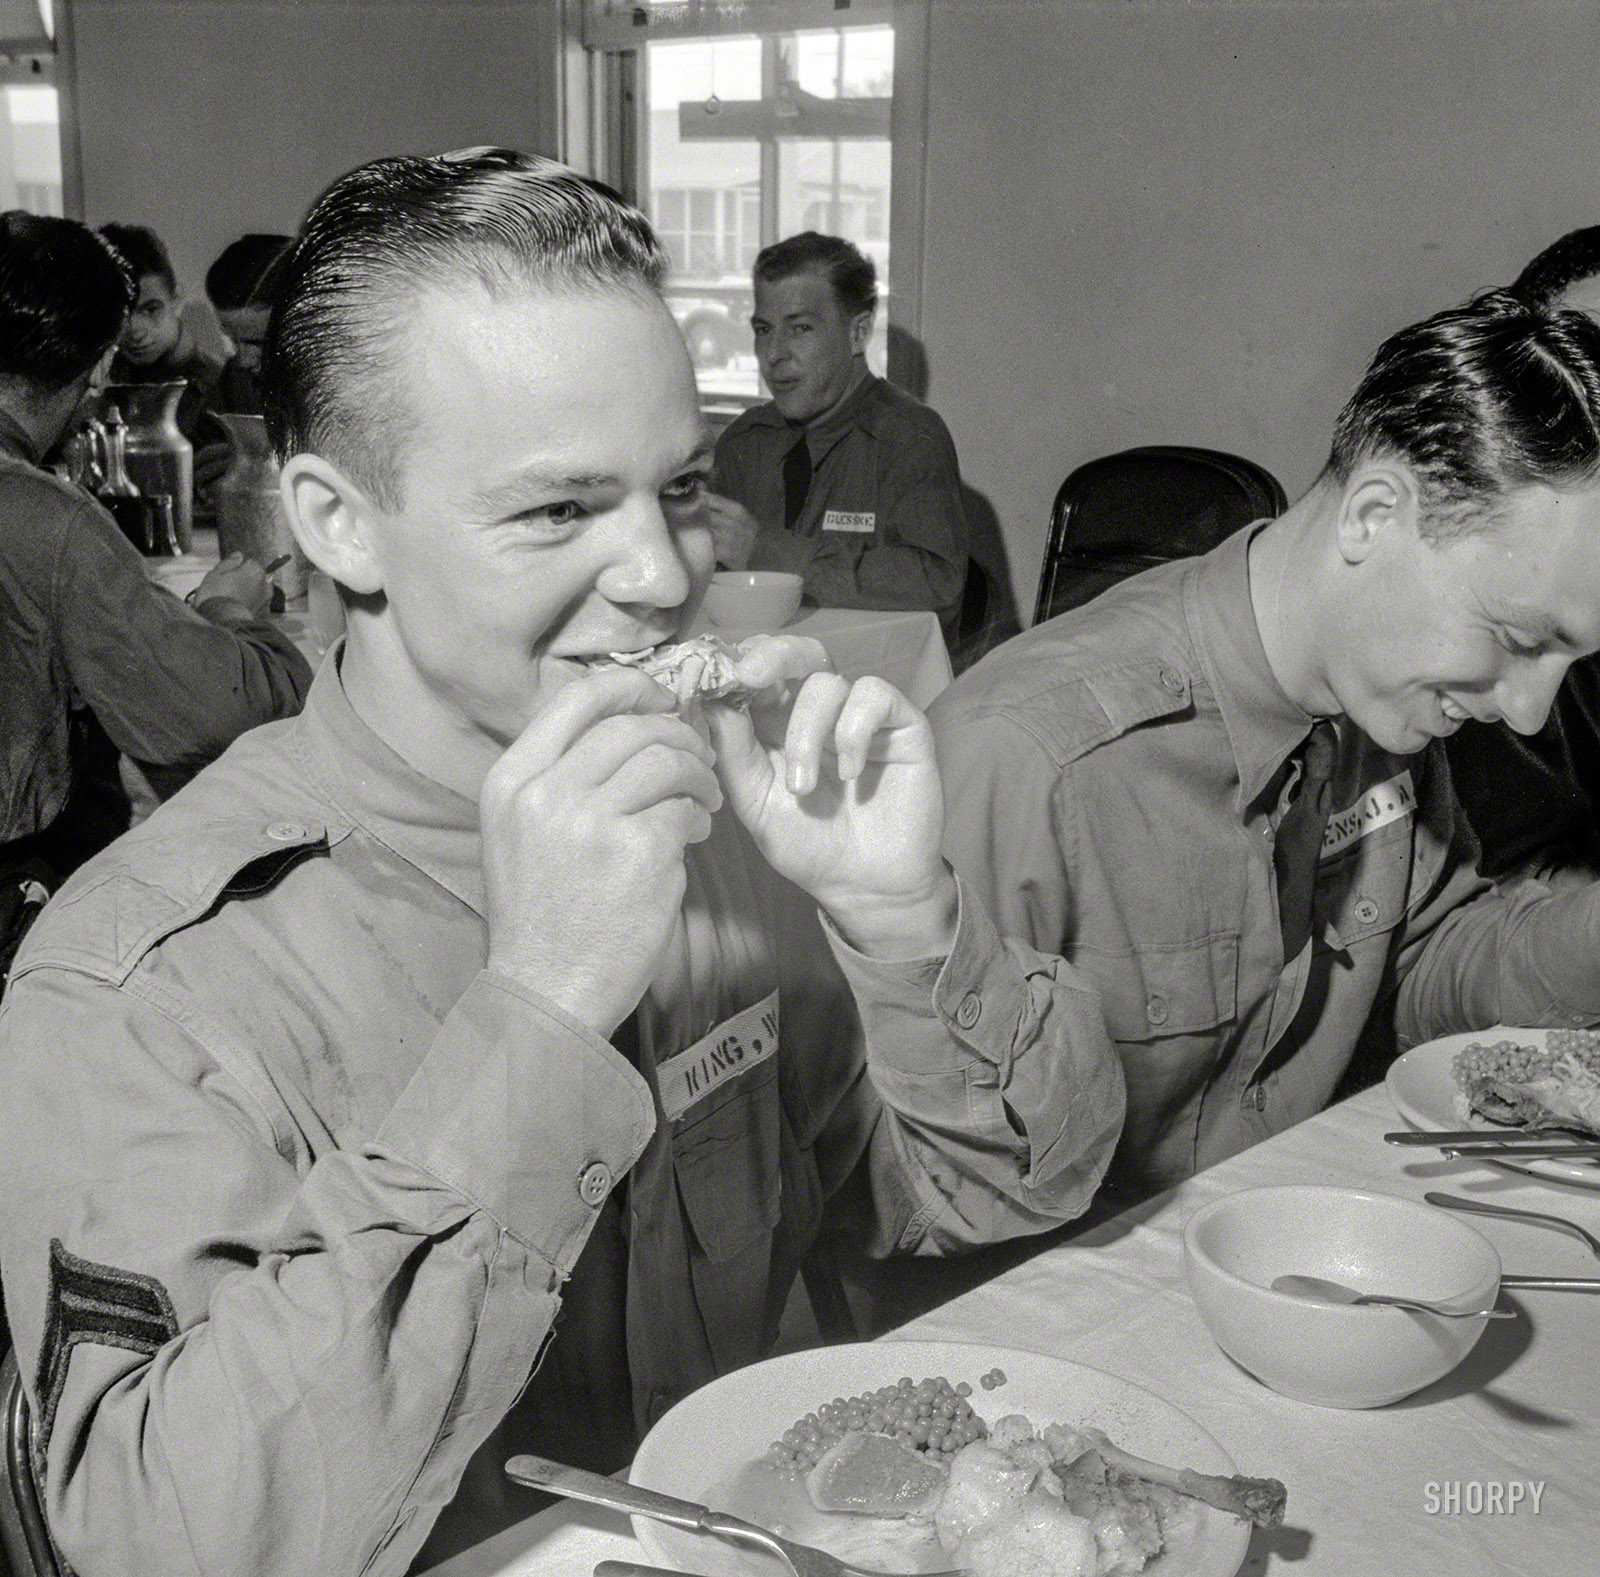 August 1941. "Chickens raised by FSA borrowers is good right down to the bone. Sunday dinner for flying cadets at Craig Field, Selma, Alabama." Medium format negative by John Collier for the Farm Security Administration. View full size.